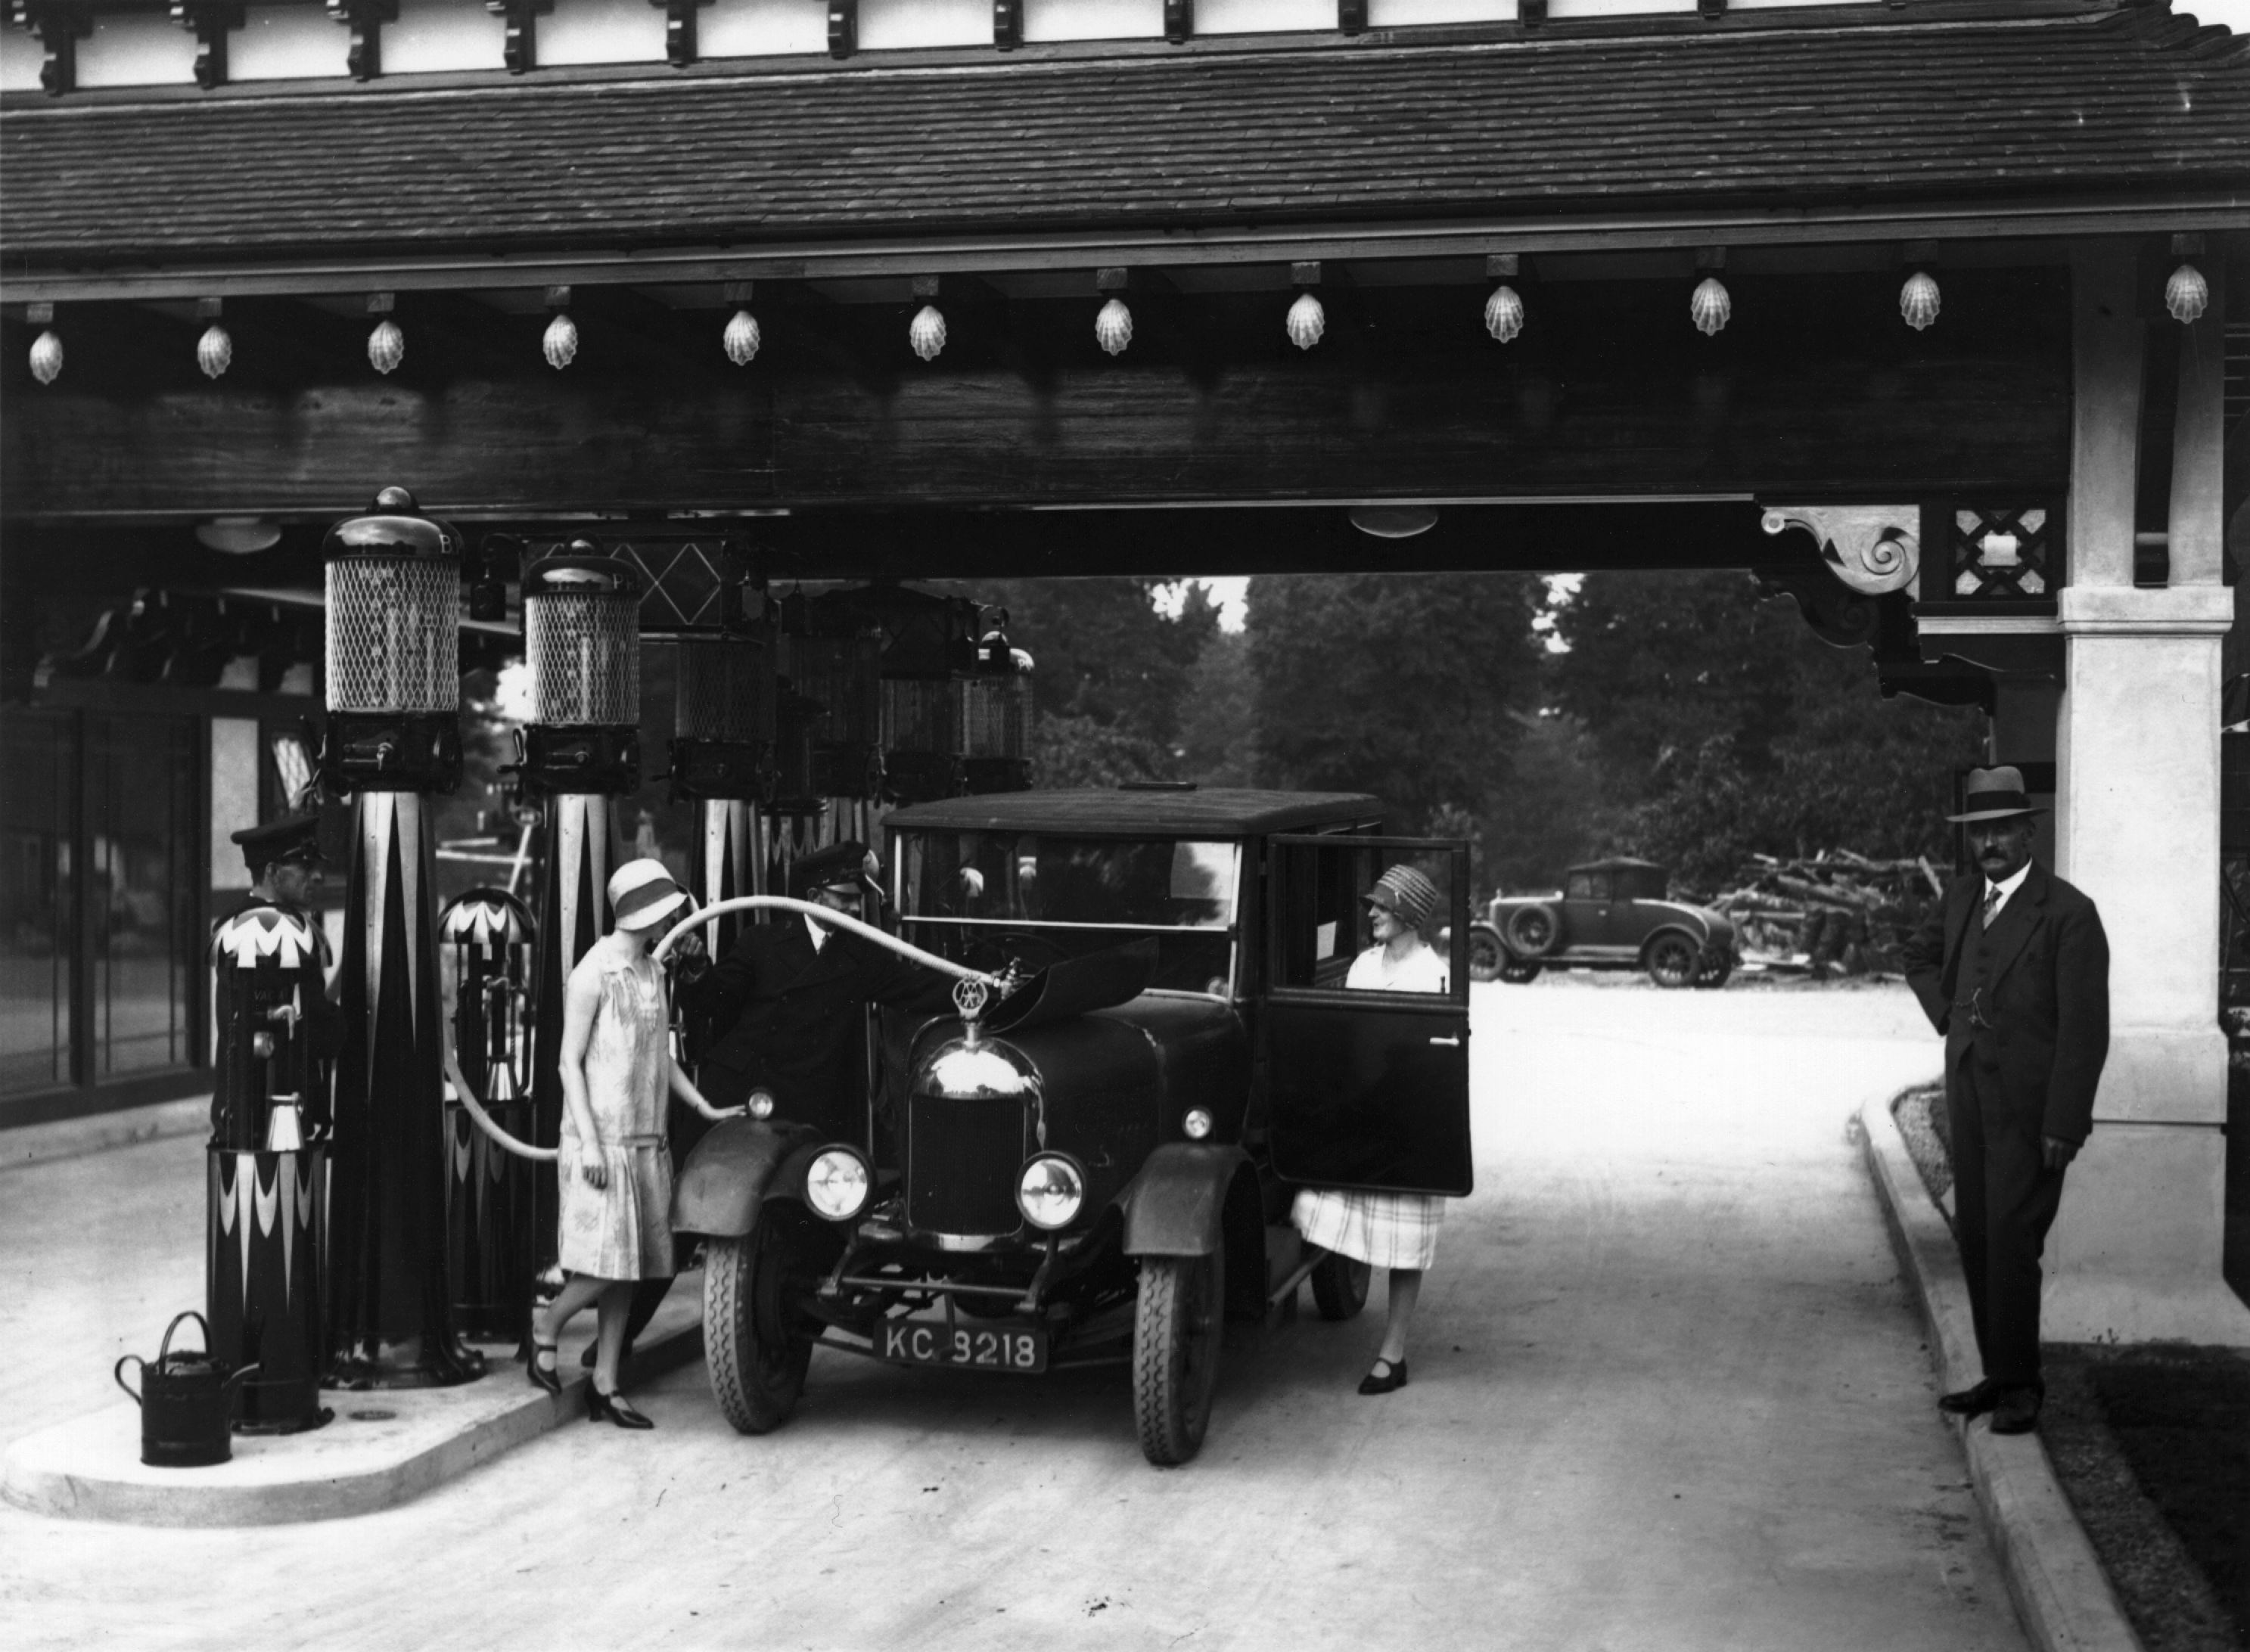 A woman's car being filled up at a petrol station in 1929.